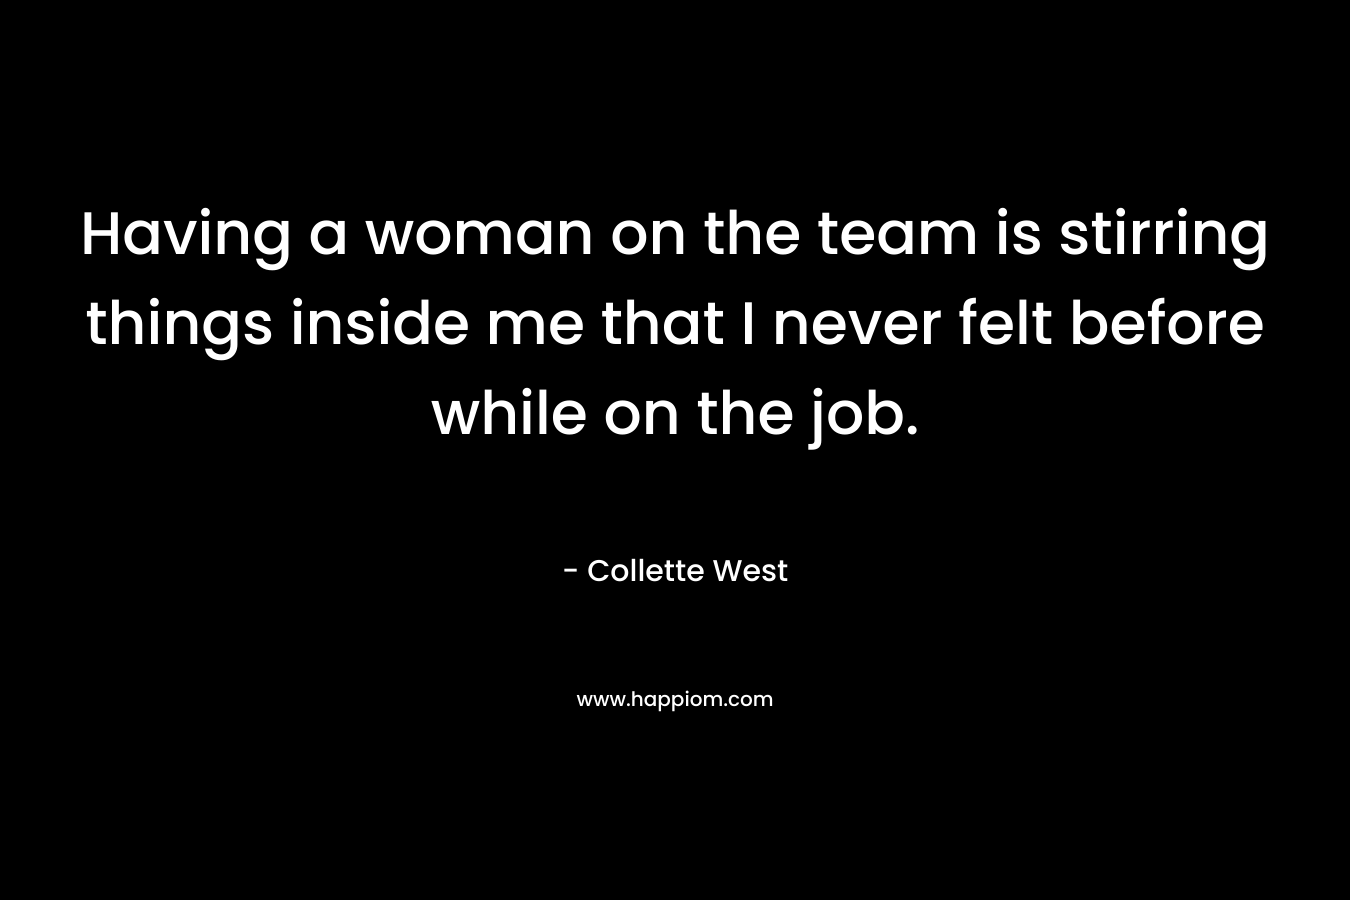 Having a woman on the team is stirring things inside me that I never felt before while on the job.